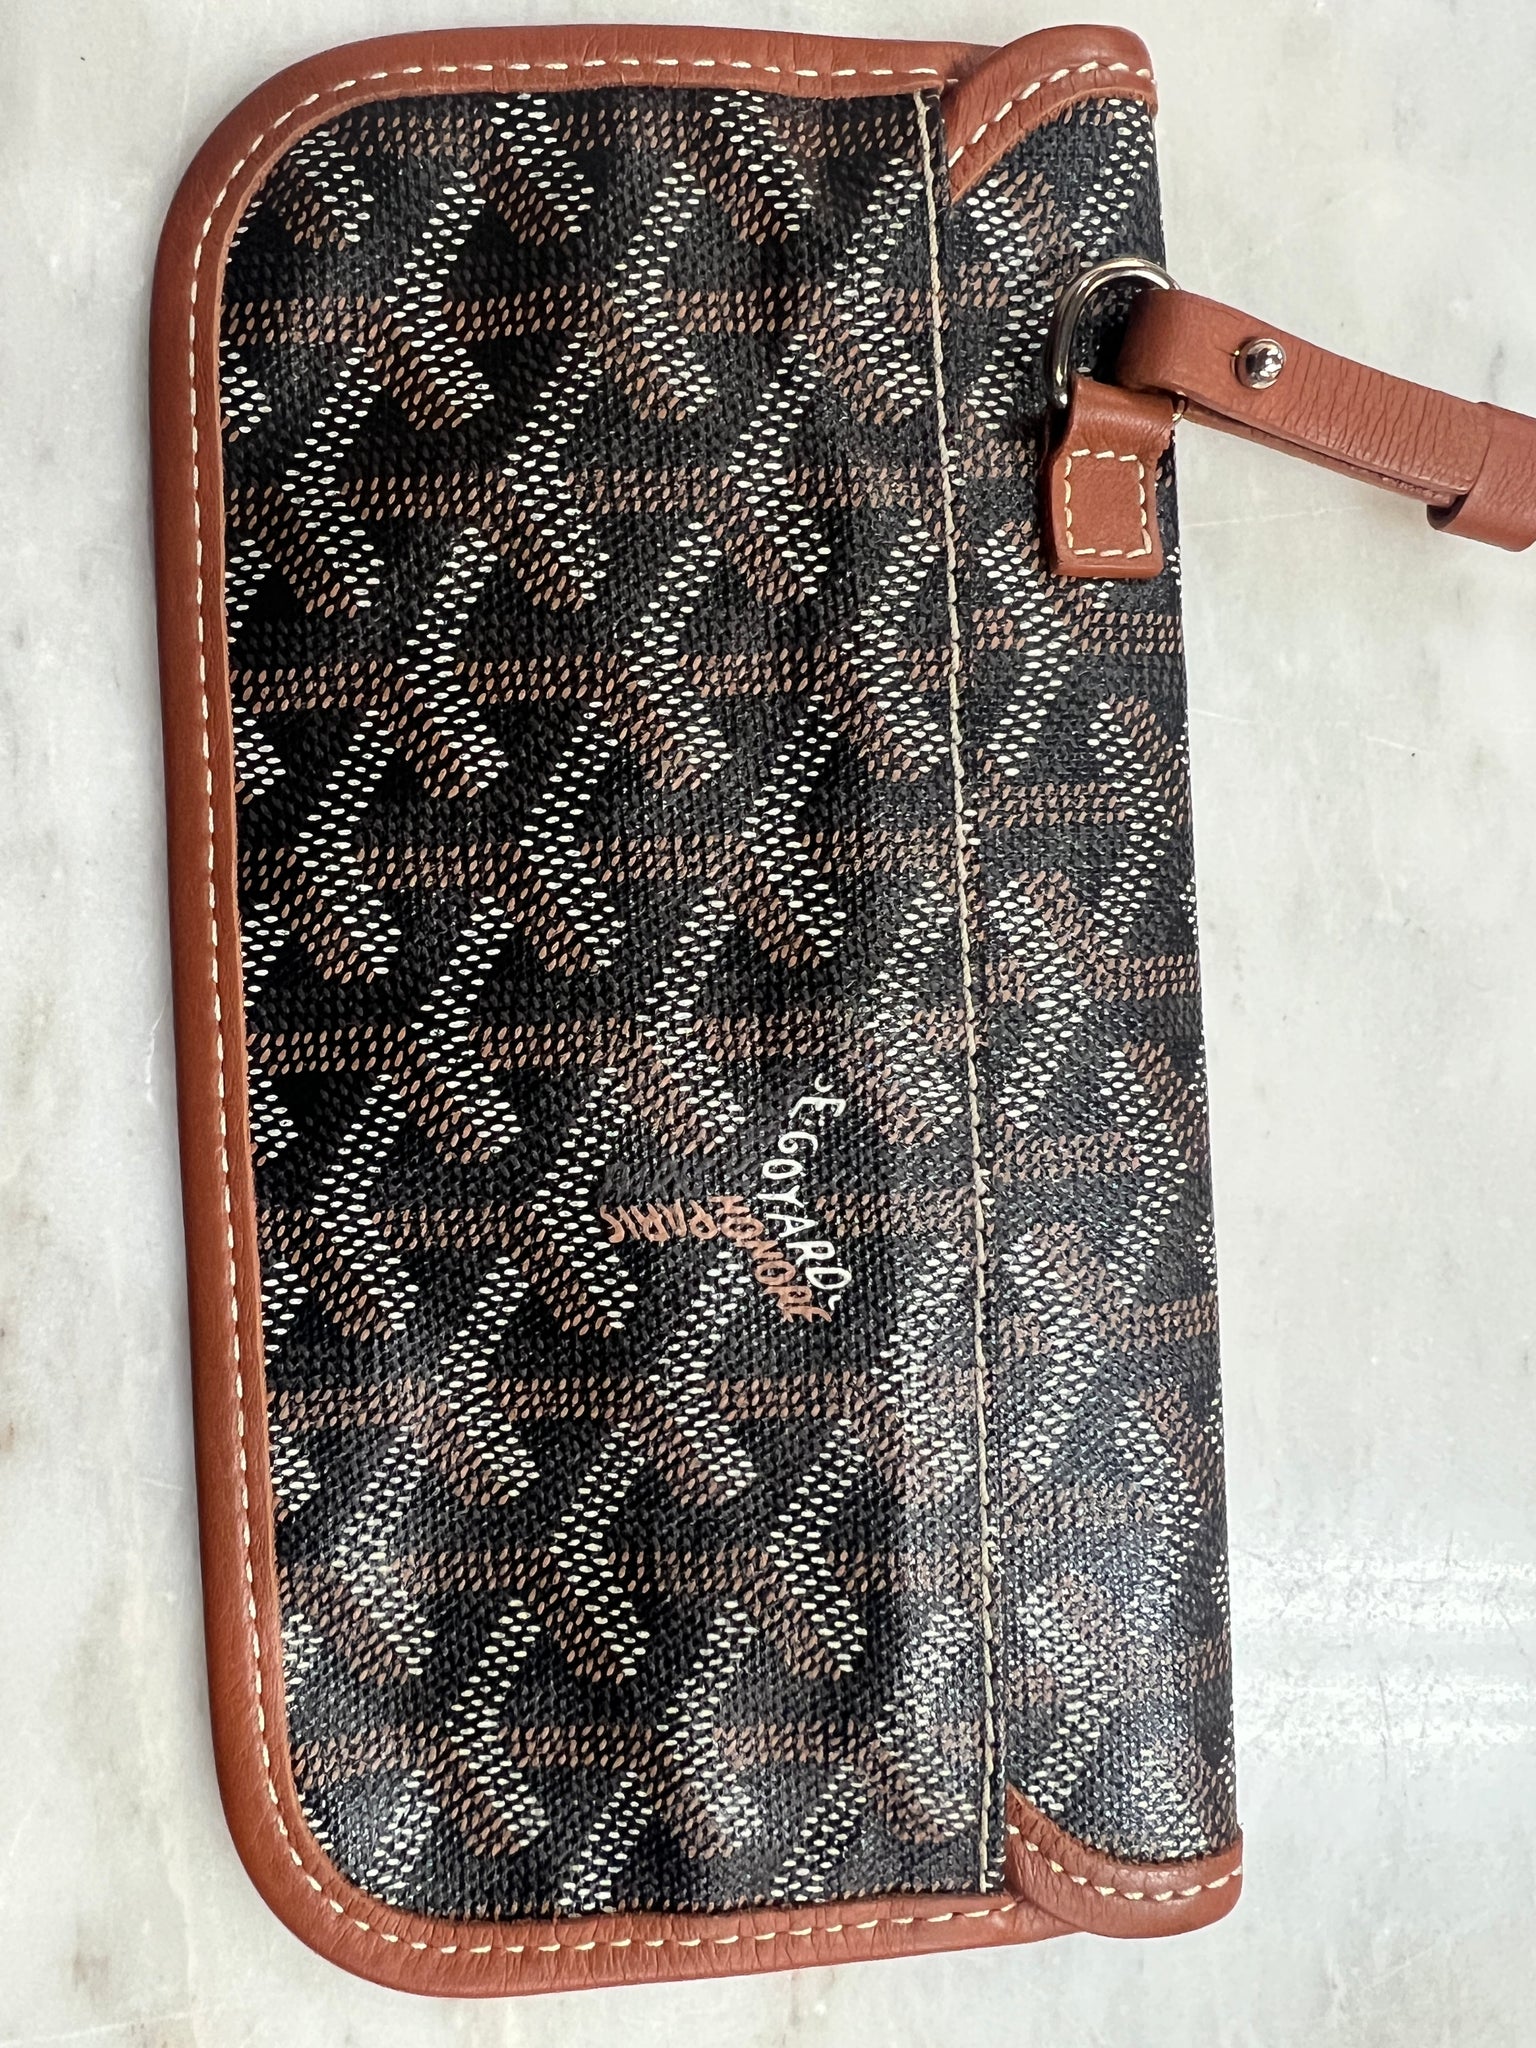 BRAND NEW Authentic GOYARD Saint Louis PM Tote Bag with Pouch Black &  Brown. Measures 15 long by 12 tall by 6 wide. Will come with dust cover.  for Sale in San